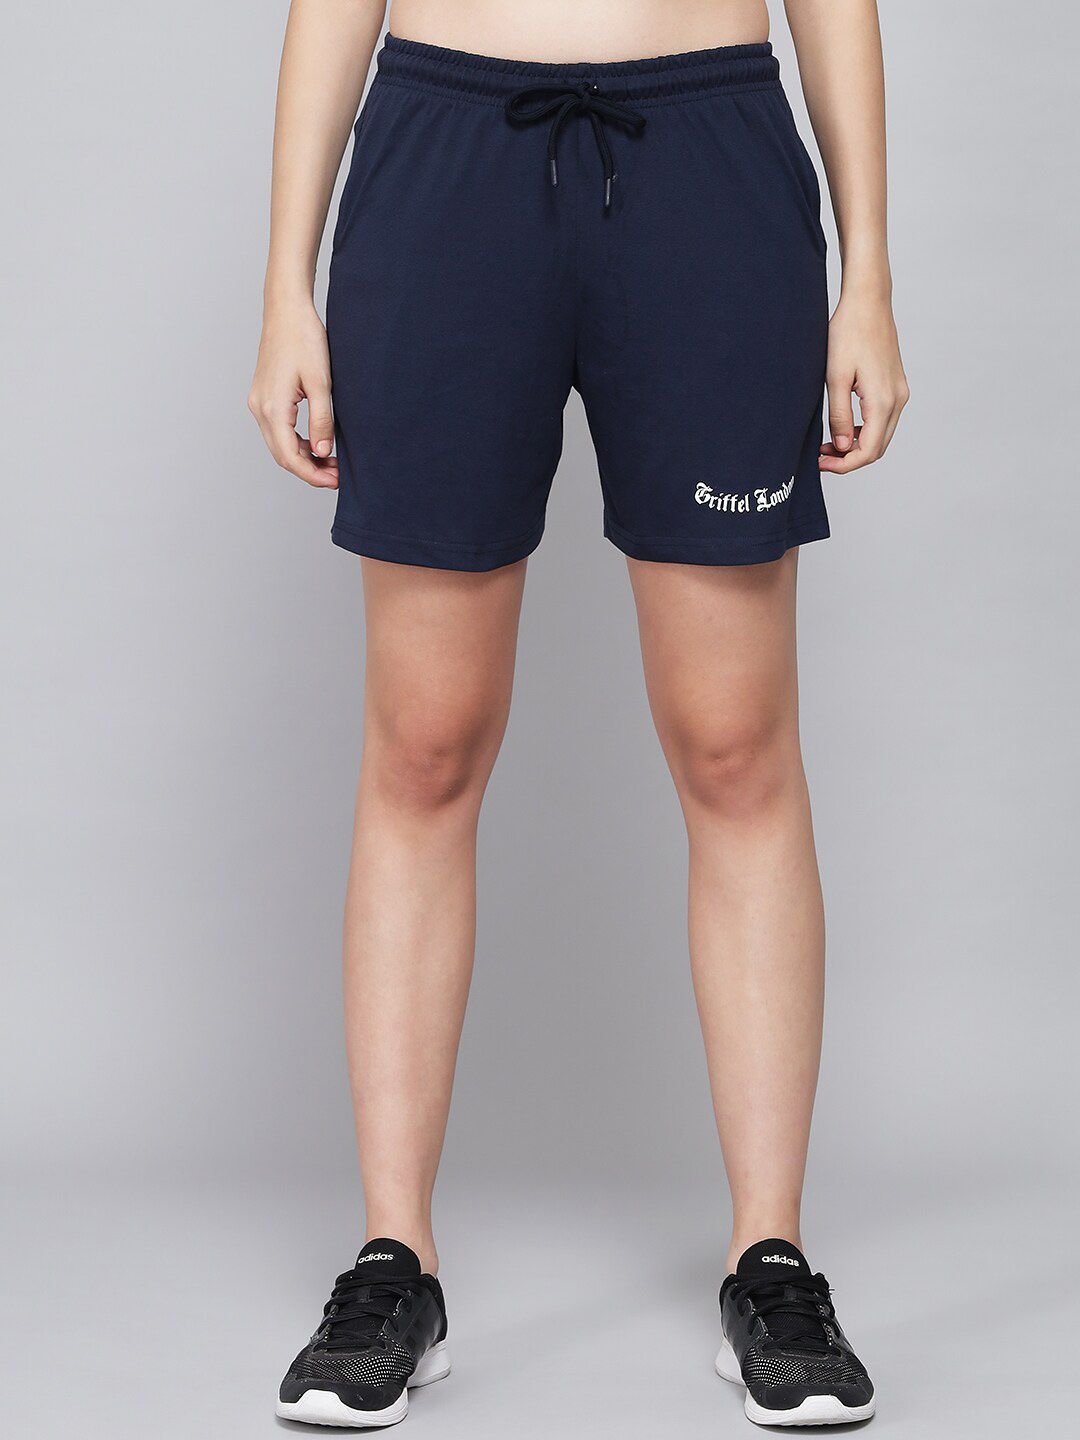 GRIFFEL Women Navy Blue Loose Fit Cotton Sports Shorts Price in India